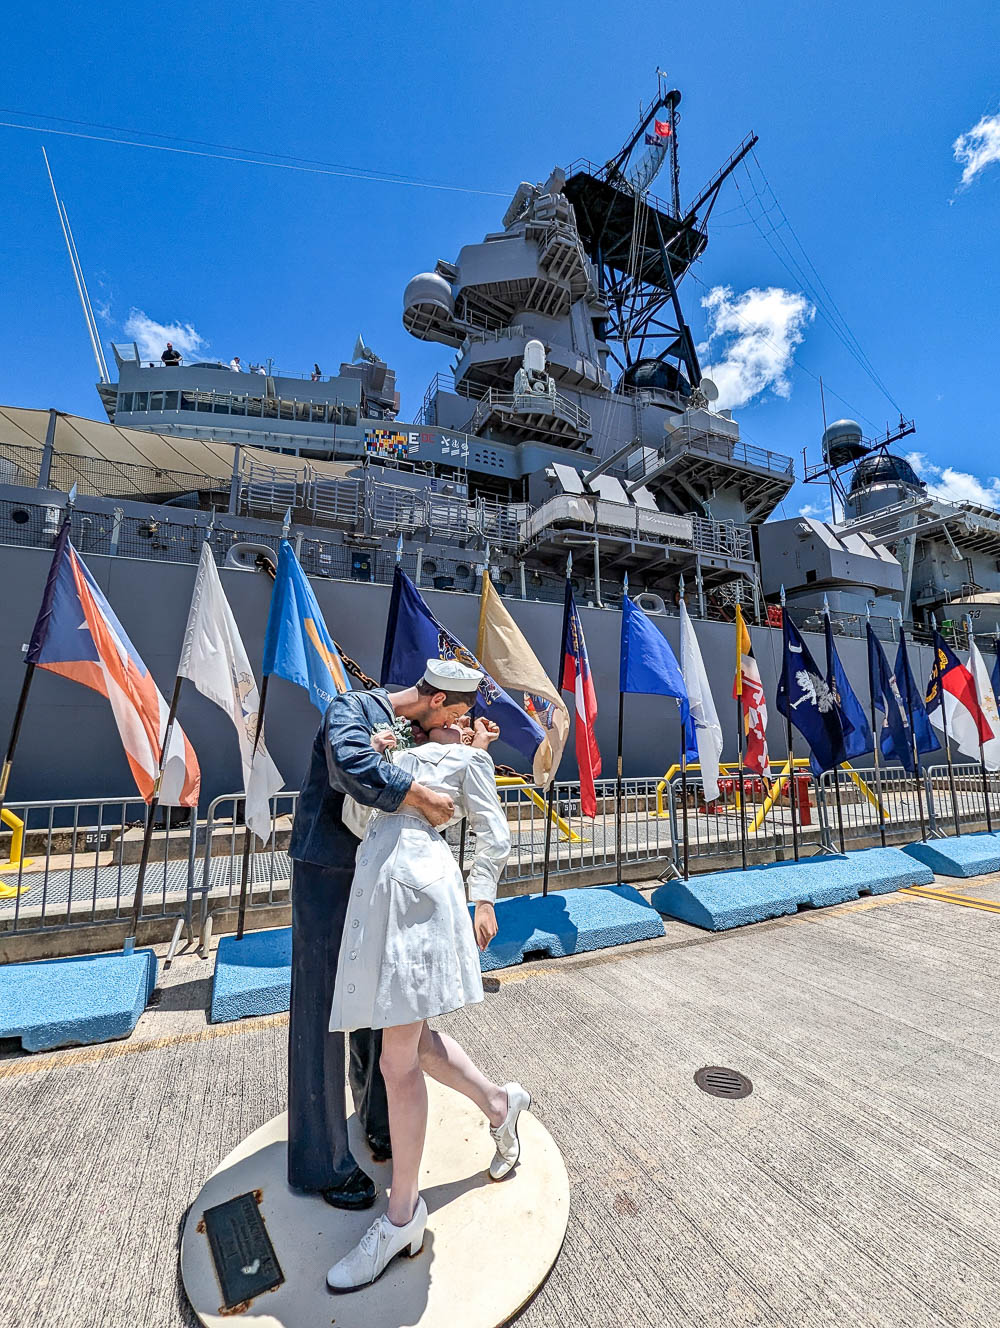 statue of a man kissing a women in front of a battleship and lots of country flags